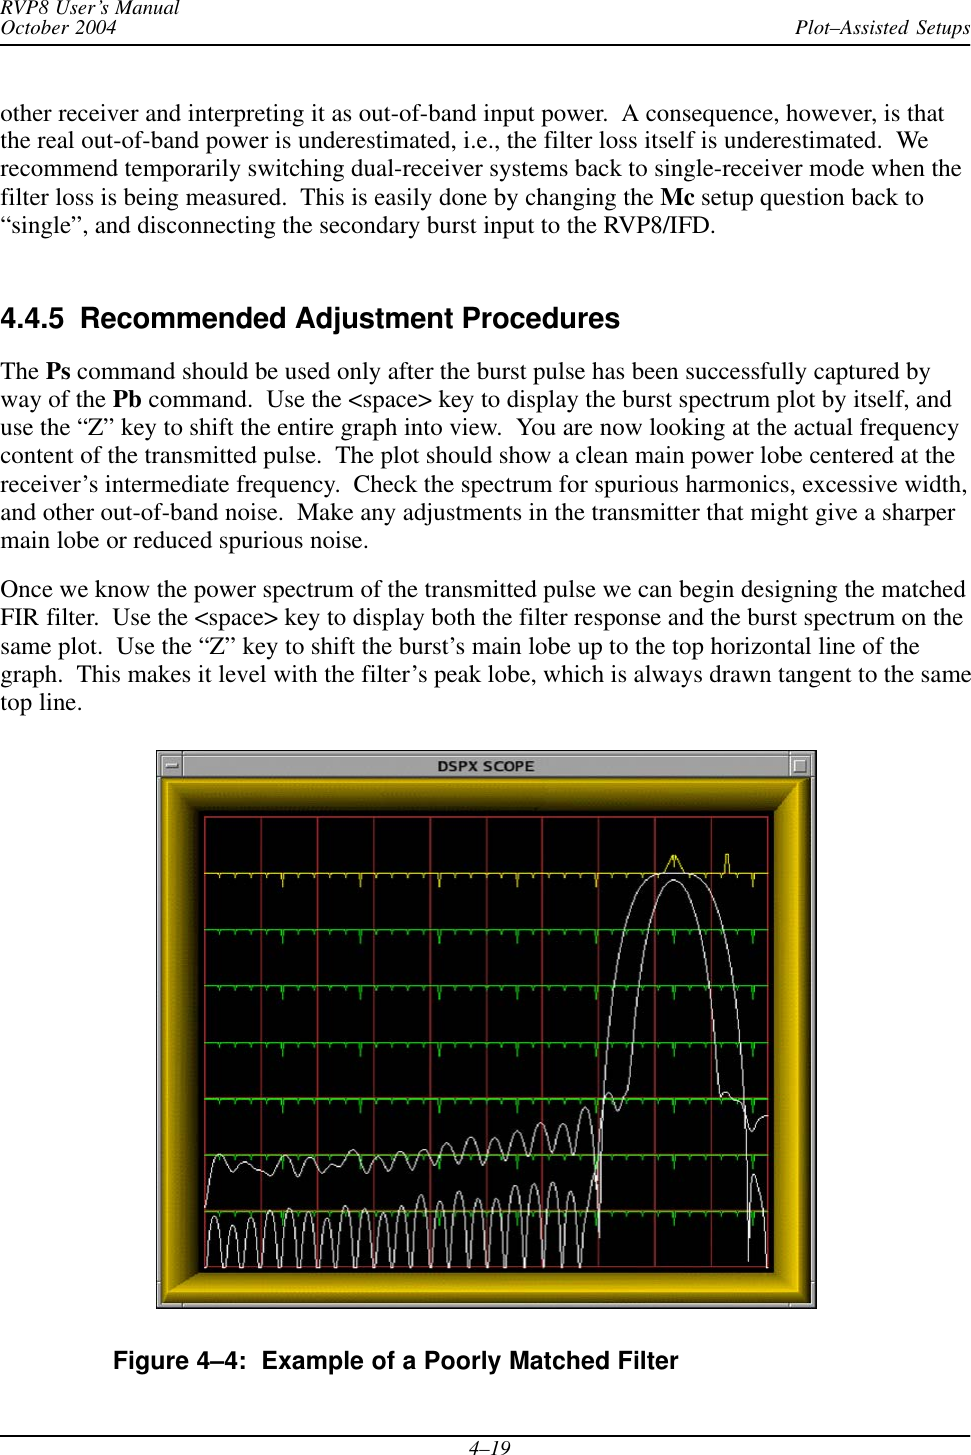 Plot–Assisted SetupsRVP8 User’s ManualOctober 20044–19other receiver and interpreting it as out-of-band input power.  A consequence, however, is thatthe real out-of-band power is underestimated, i.e., the filter loss itself is underestimated.  Werecommend temporarily switching dual-receiver systems back to single-receiver mode when thefilter loss is being measured.  This is easily done by changing the Mc setup question back to“single”, and disconnecting the secondary burst input to the RVP8/IFD.4.4.5  Recommended Adjustment ProceduresThe Ps command should be used only after the burst pulse has been successfully captured byway of the Pb command.  Use the &lt;space&gt; key to display the burst spectrum plot by itself, anduse the “Z” key to shift the entire graph into view.  You are now looking at the actual frequencycontent of the transmitted pulse.  The plot should show a clean main power lobe centered at thereceiver’s intermediate frequency.  Check the spectrum for spurious harmonics, excessive width,and other out-of-band noise.  Make any adjustments in the transmitter that might give a sharpermain lobe or reduced spurious noise.Once we know the power spectrum of the transmitted pulse we can begin designing the matchedFIR filter.  Use the &lt;space&gt; key to display both the filter response and the burst spectrum on thesame plot.  Use the “Z” key to shift the burst’s main lobe up to the top horizontal line of thegraph.  This makes it level with the filter’s peak lobe, which is always drawn tangent to the sametop line.Figure 4–4:  Example of a Poorly Matched Filter